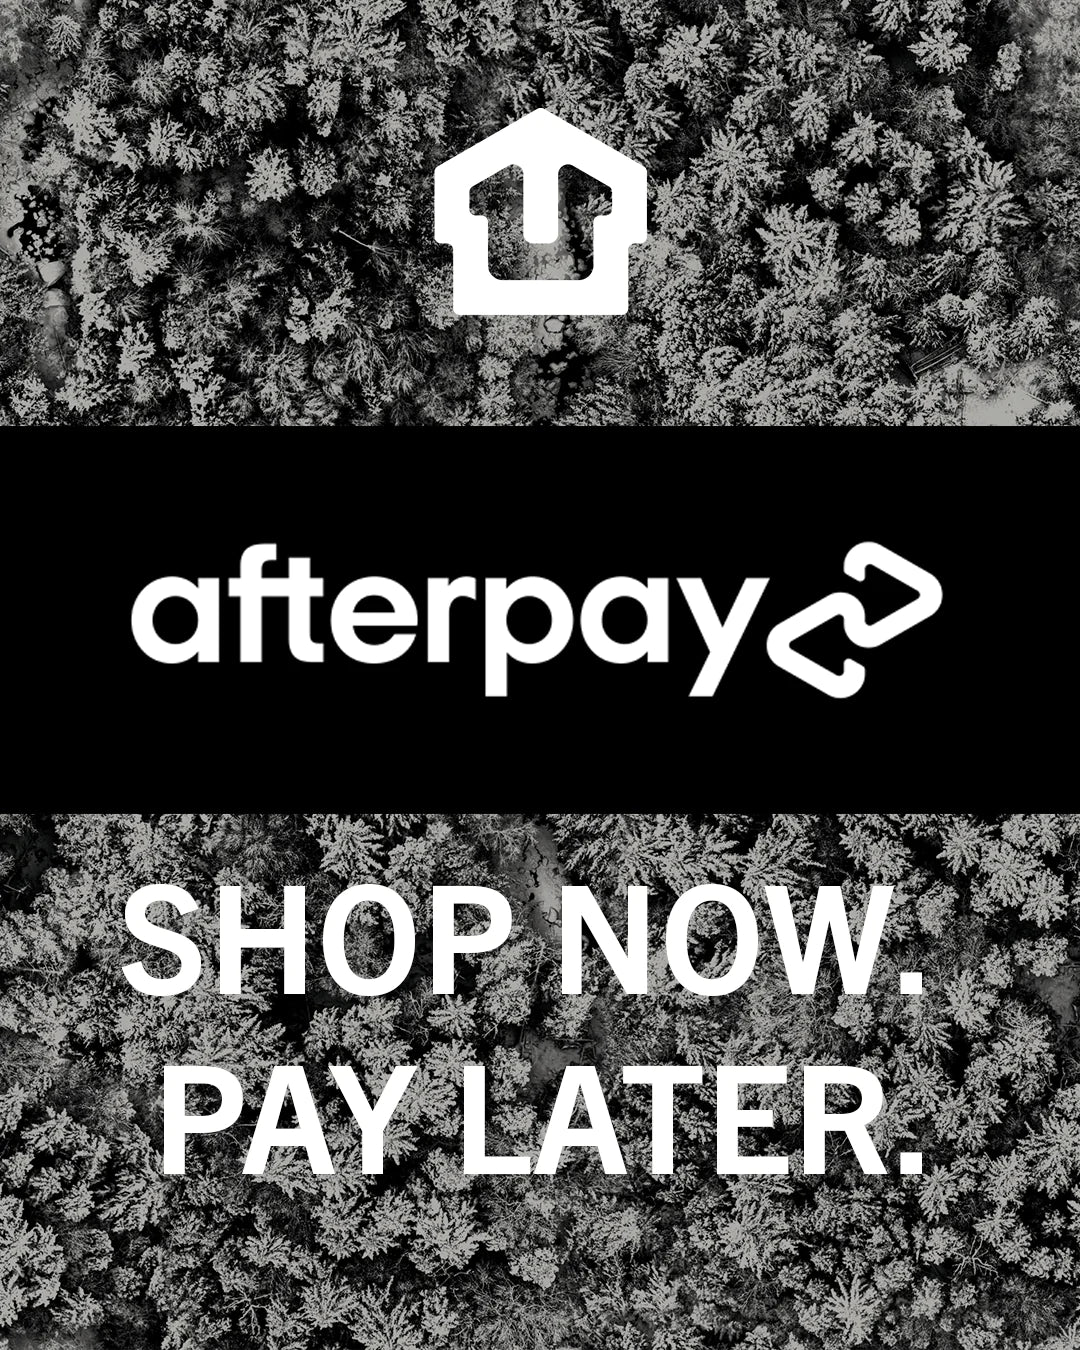 Introducing Afterpay!